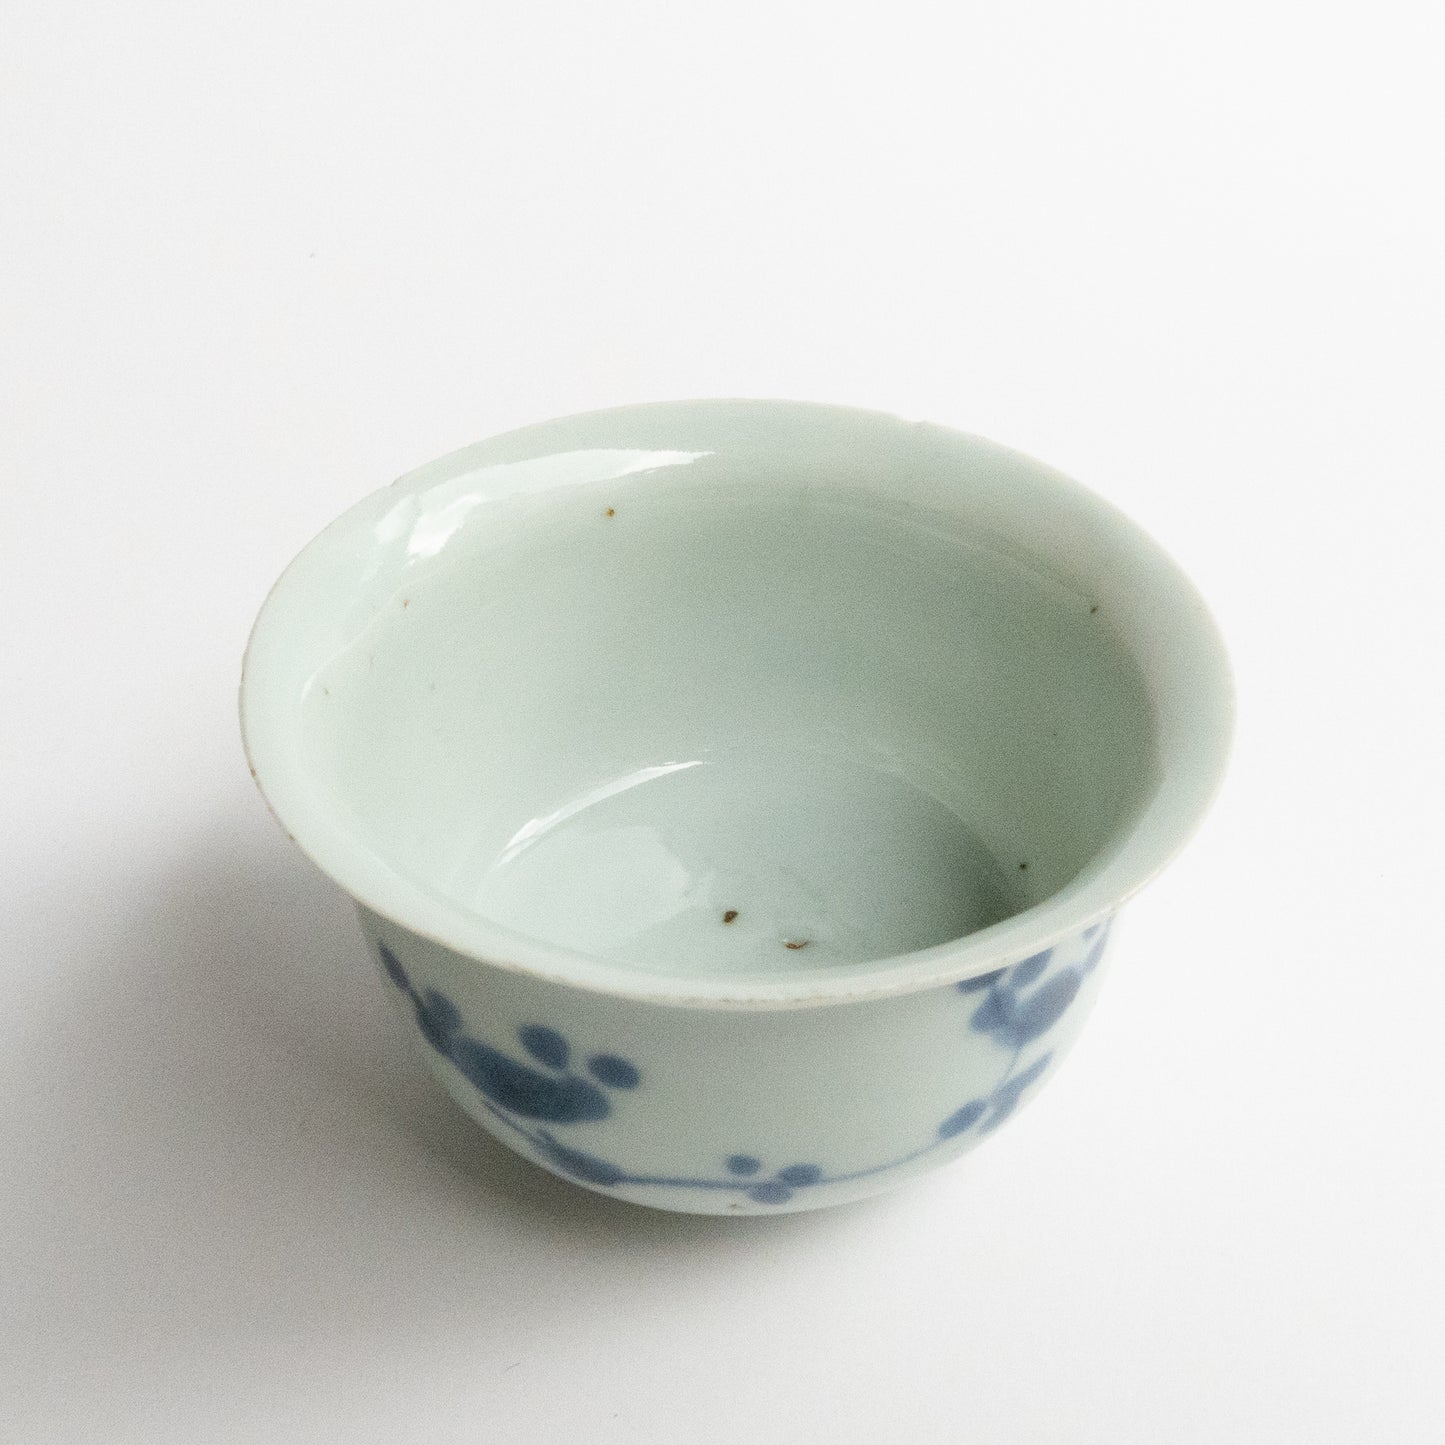 60ml Ming Dynasty Cherry Blossom Cup